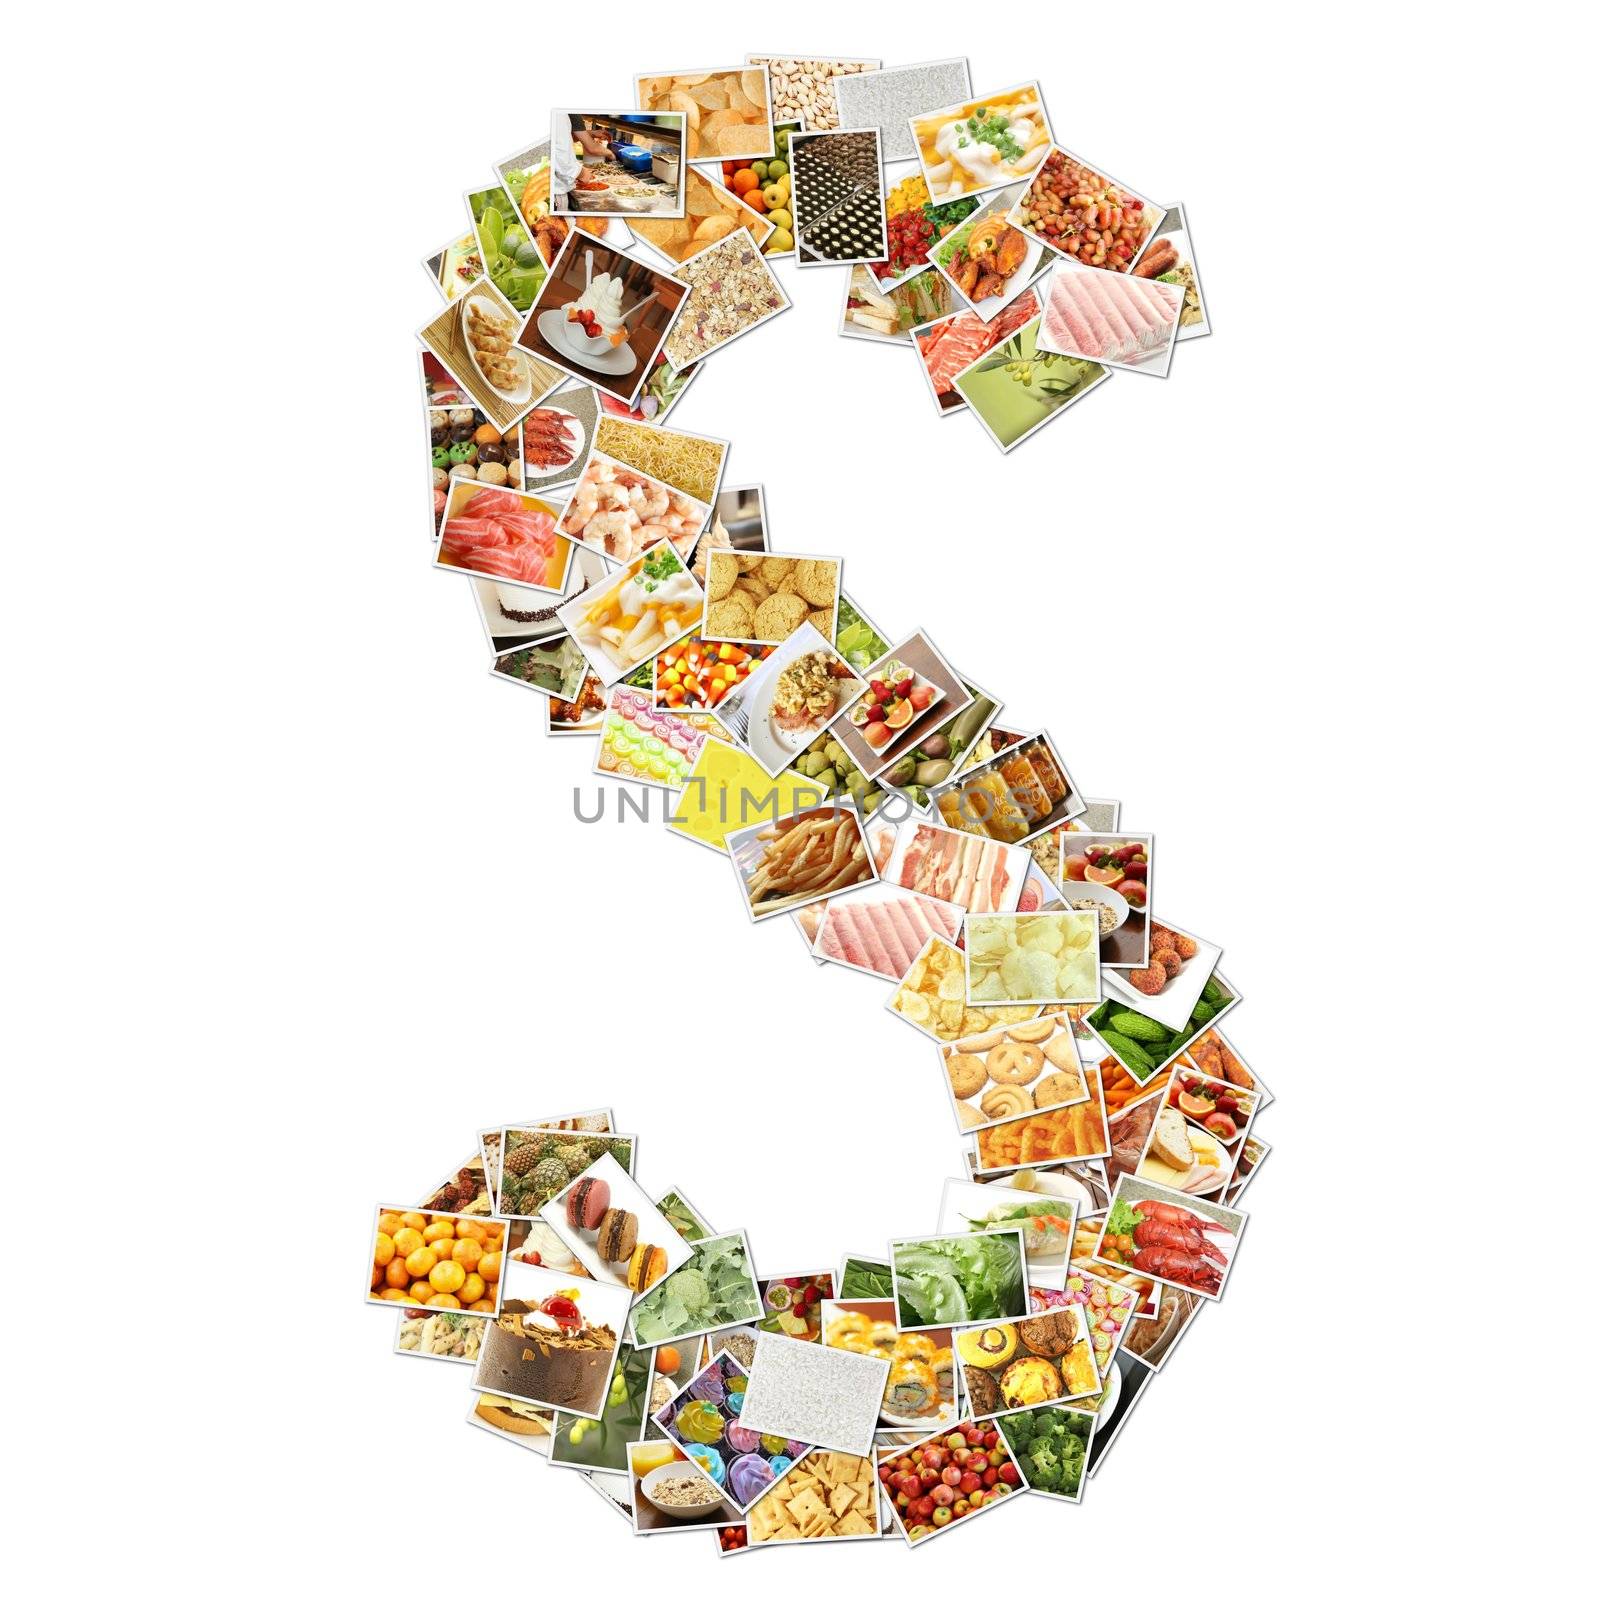 Letter S with Food Collage Concept Art